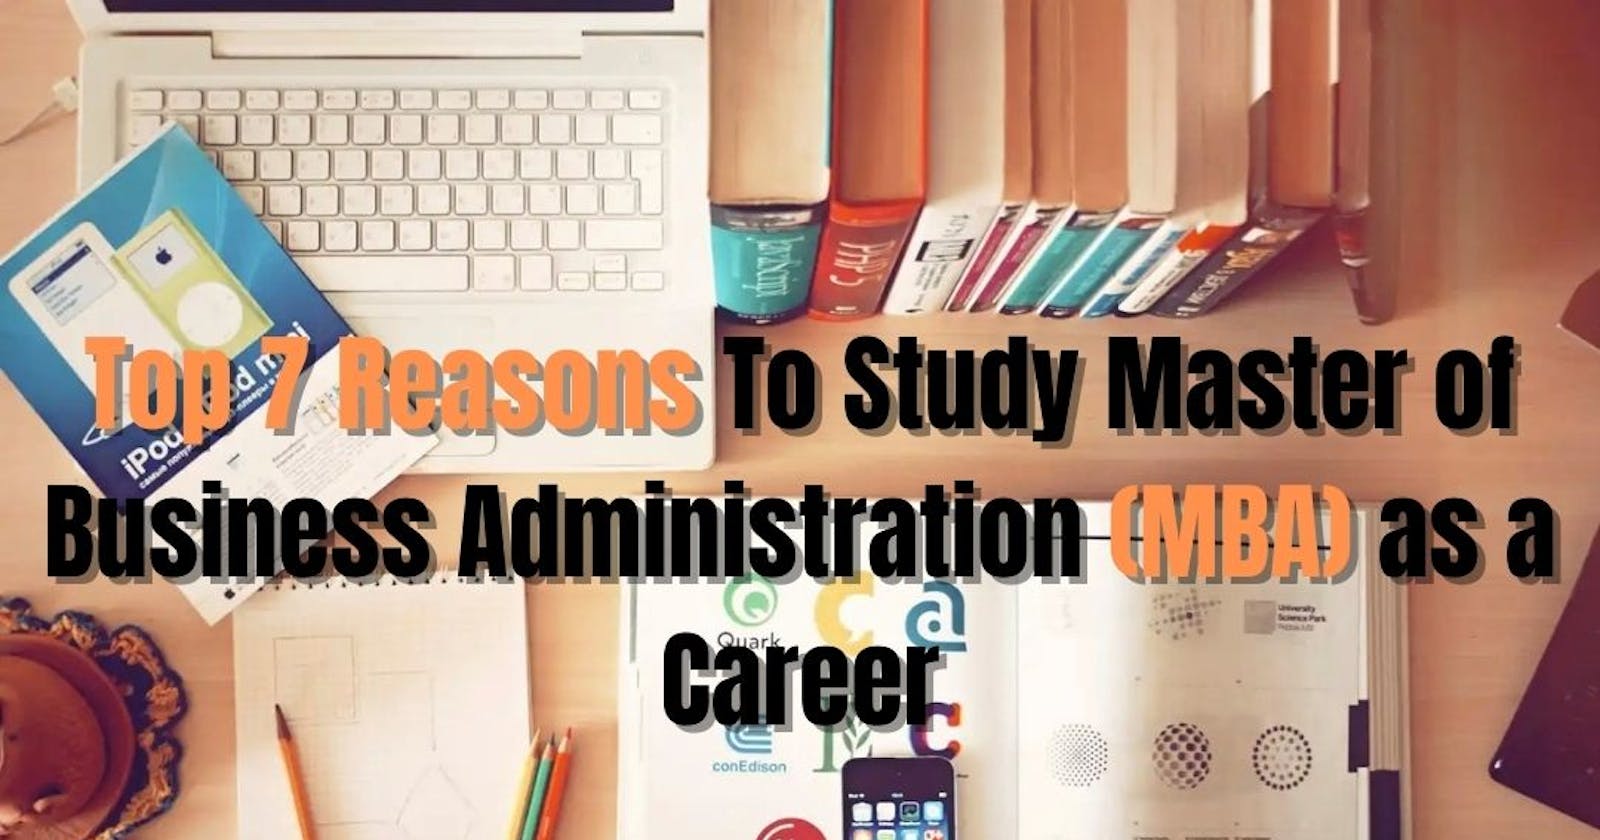 Top 7 Reasons To Study Master of Business Administration (MBA) as a Career